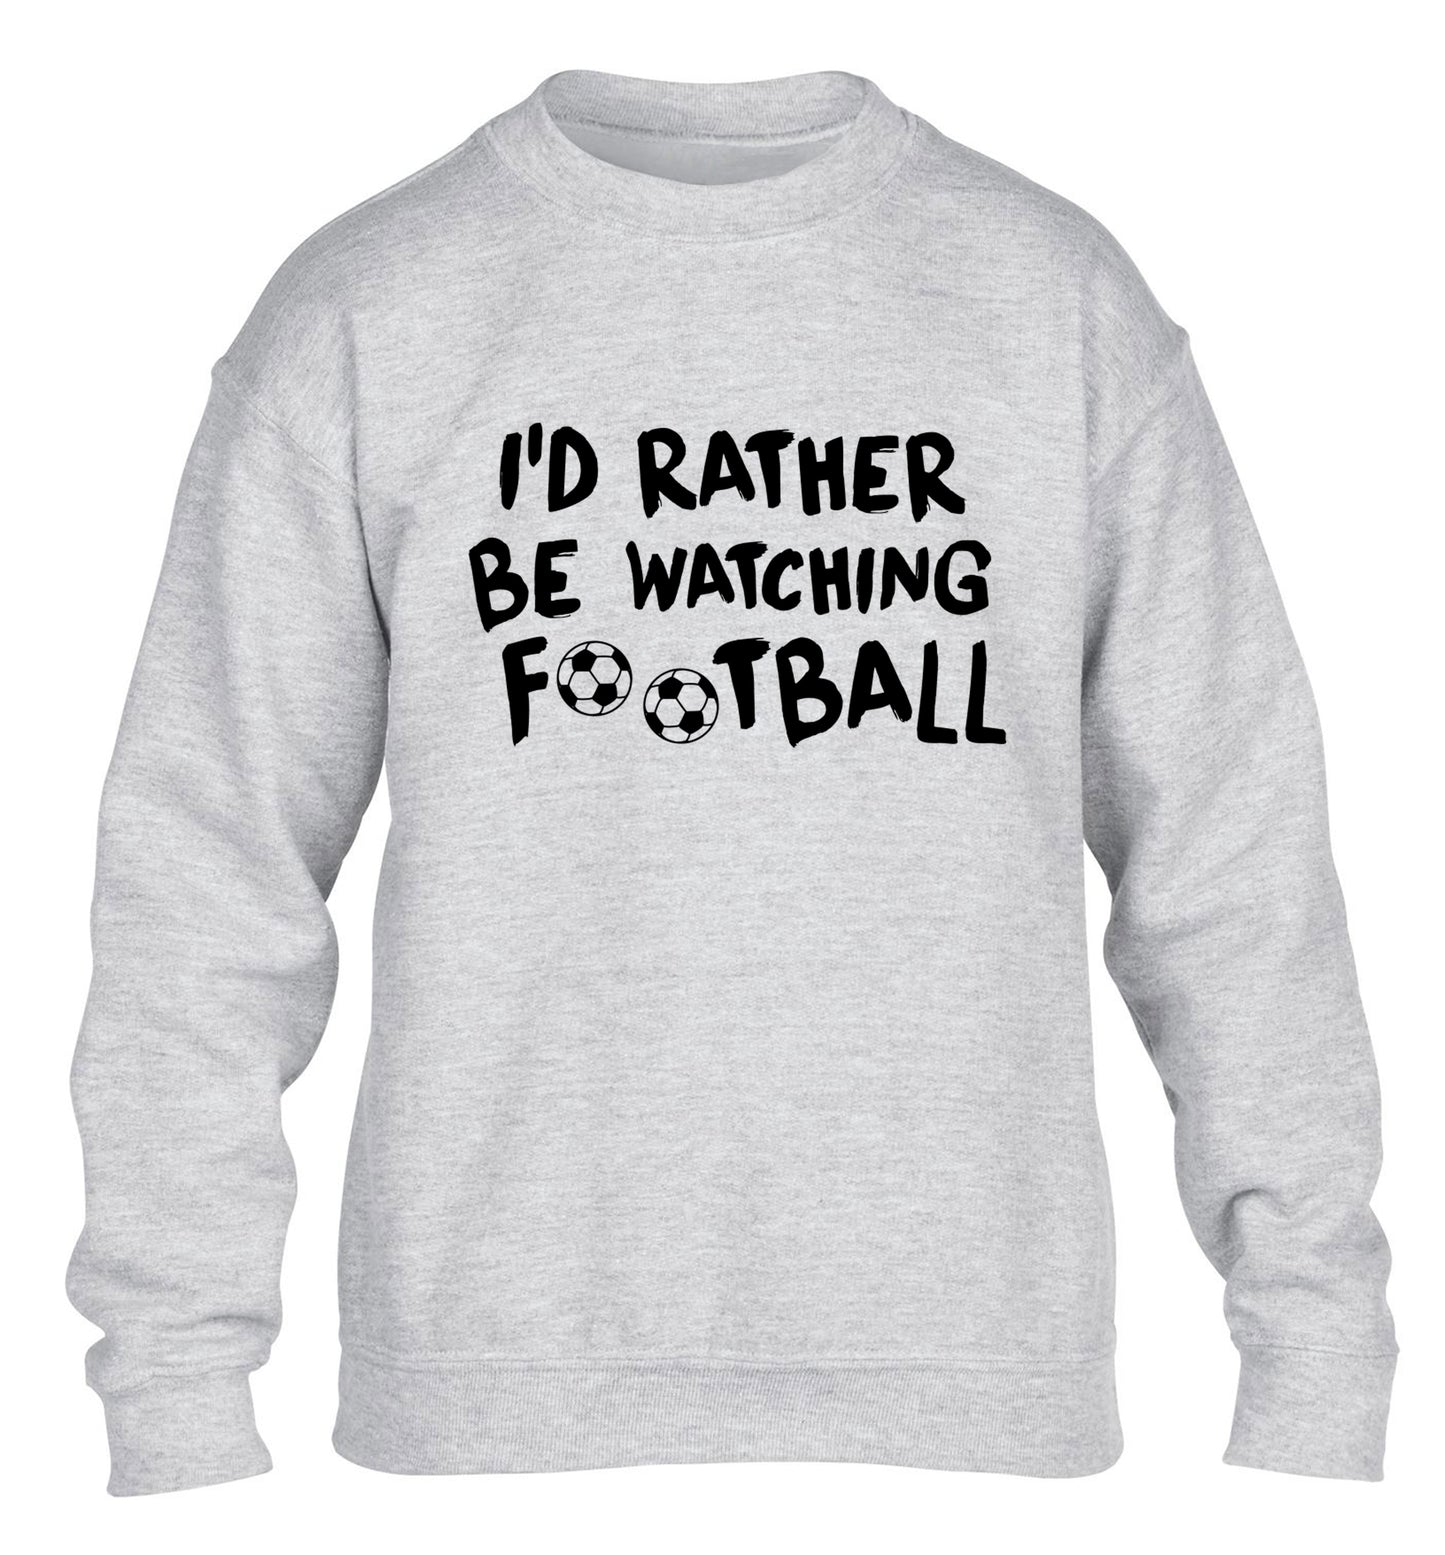 I'd rather be watching football children's grey sweater 12-14 Years